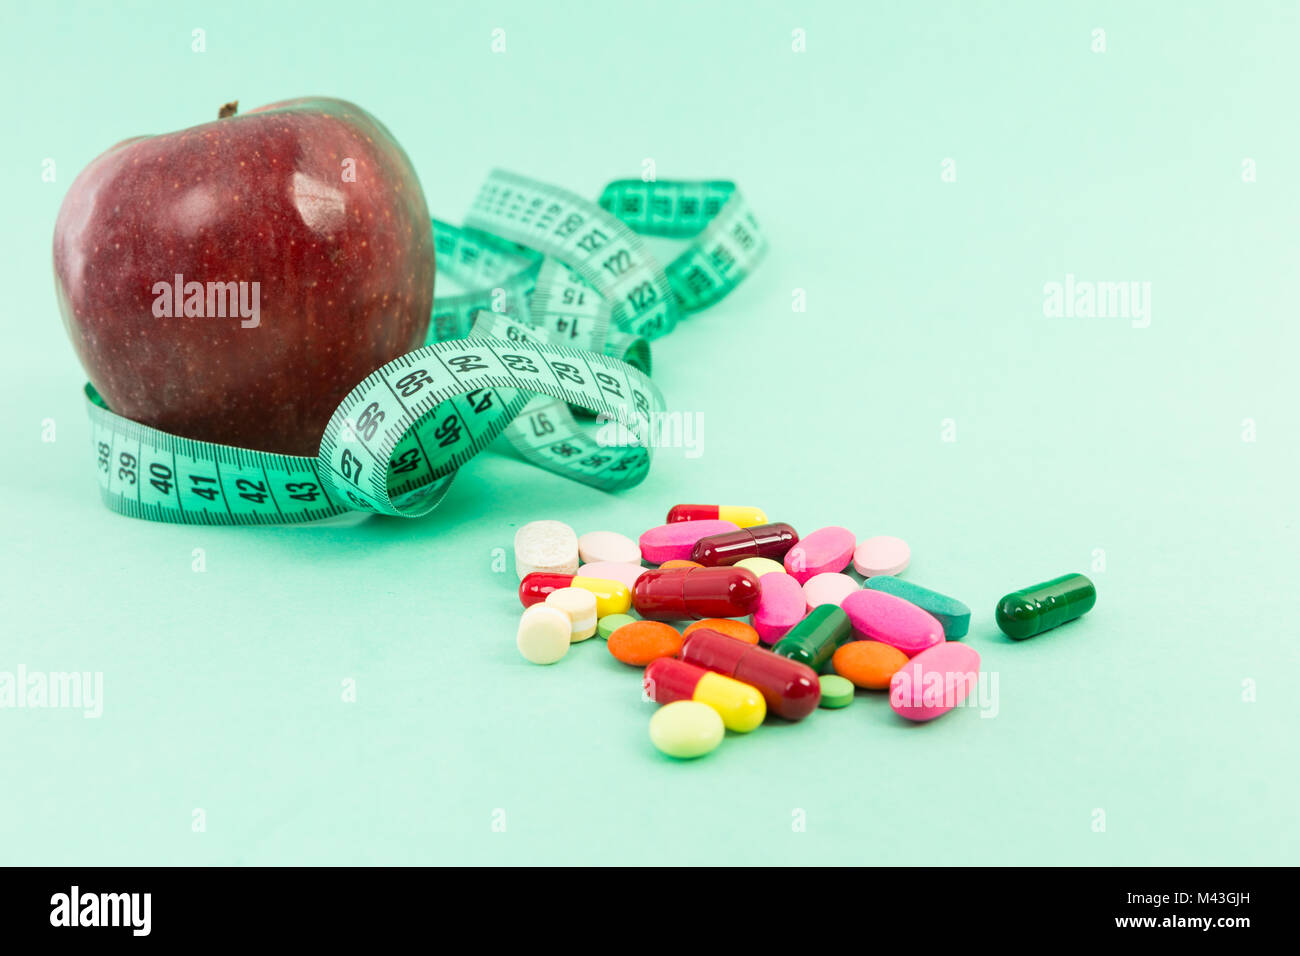 Dieting concept with natural apple, measuring tape and pills or tablets on medical green background Stock Photo